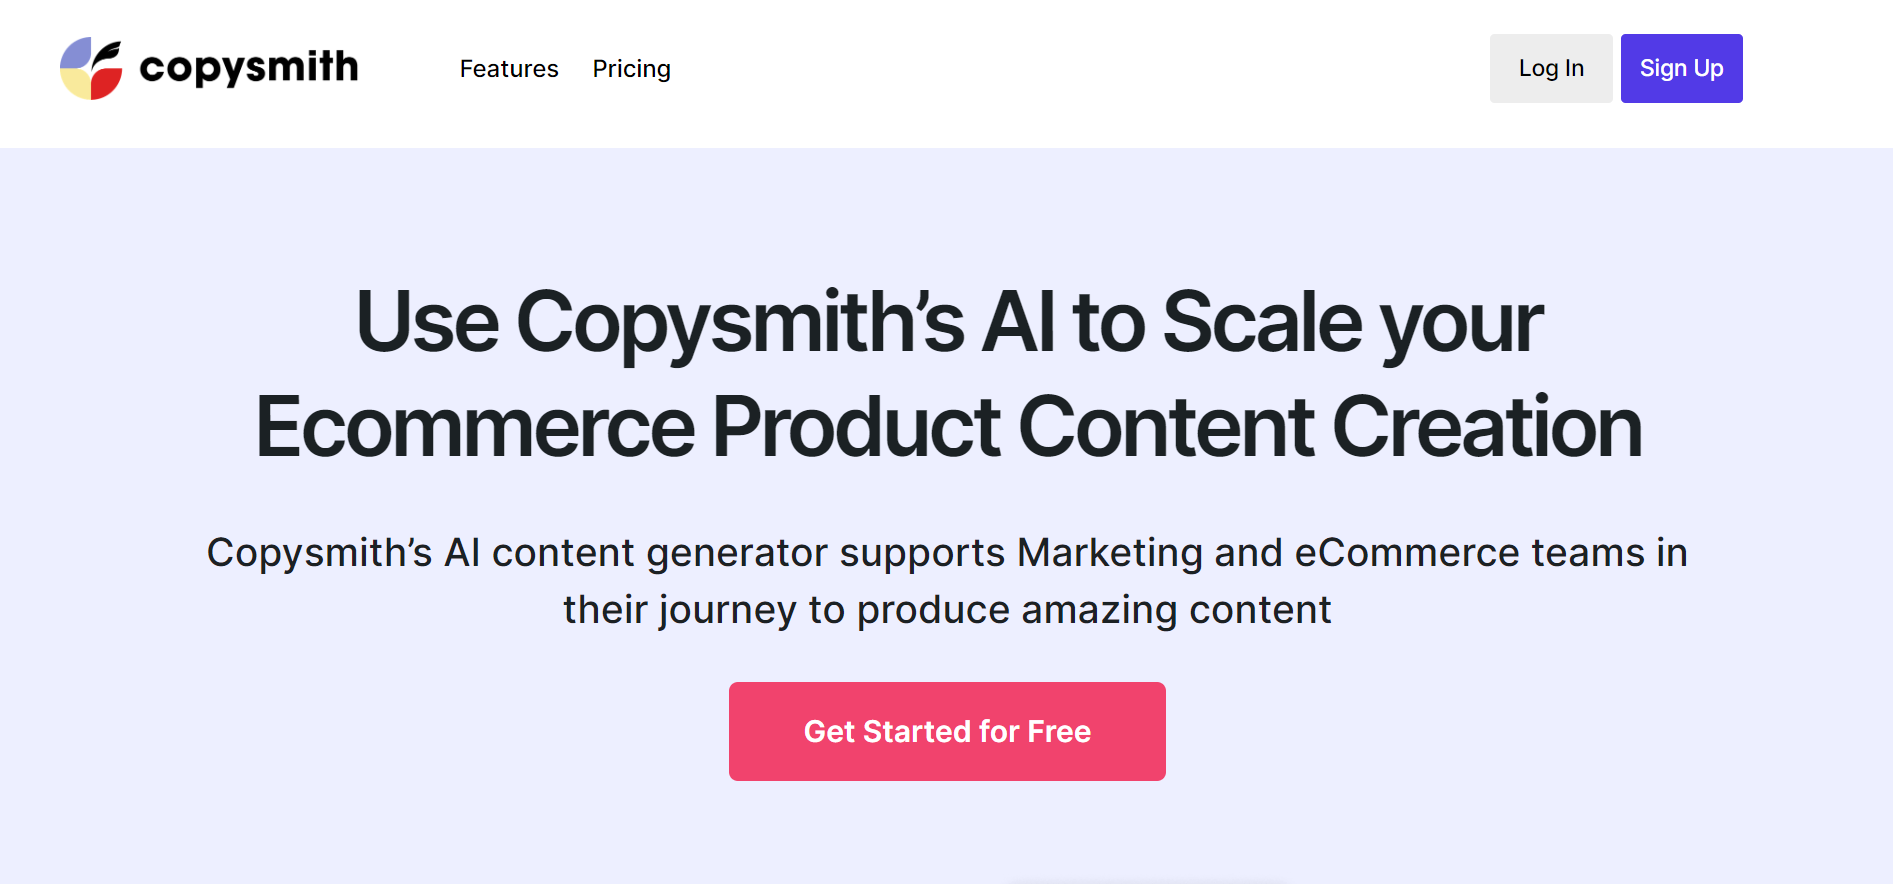 Copysmith Landing Page - Use Copysmith's AI to Scale your Ecommerce Product Content Creation